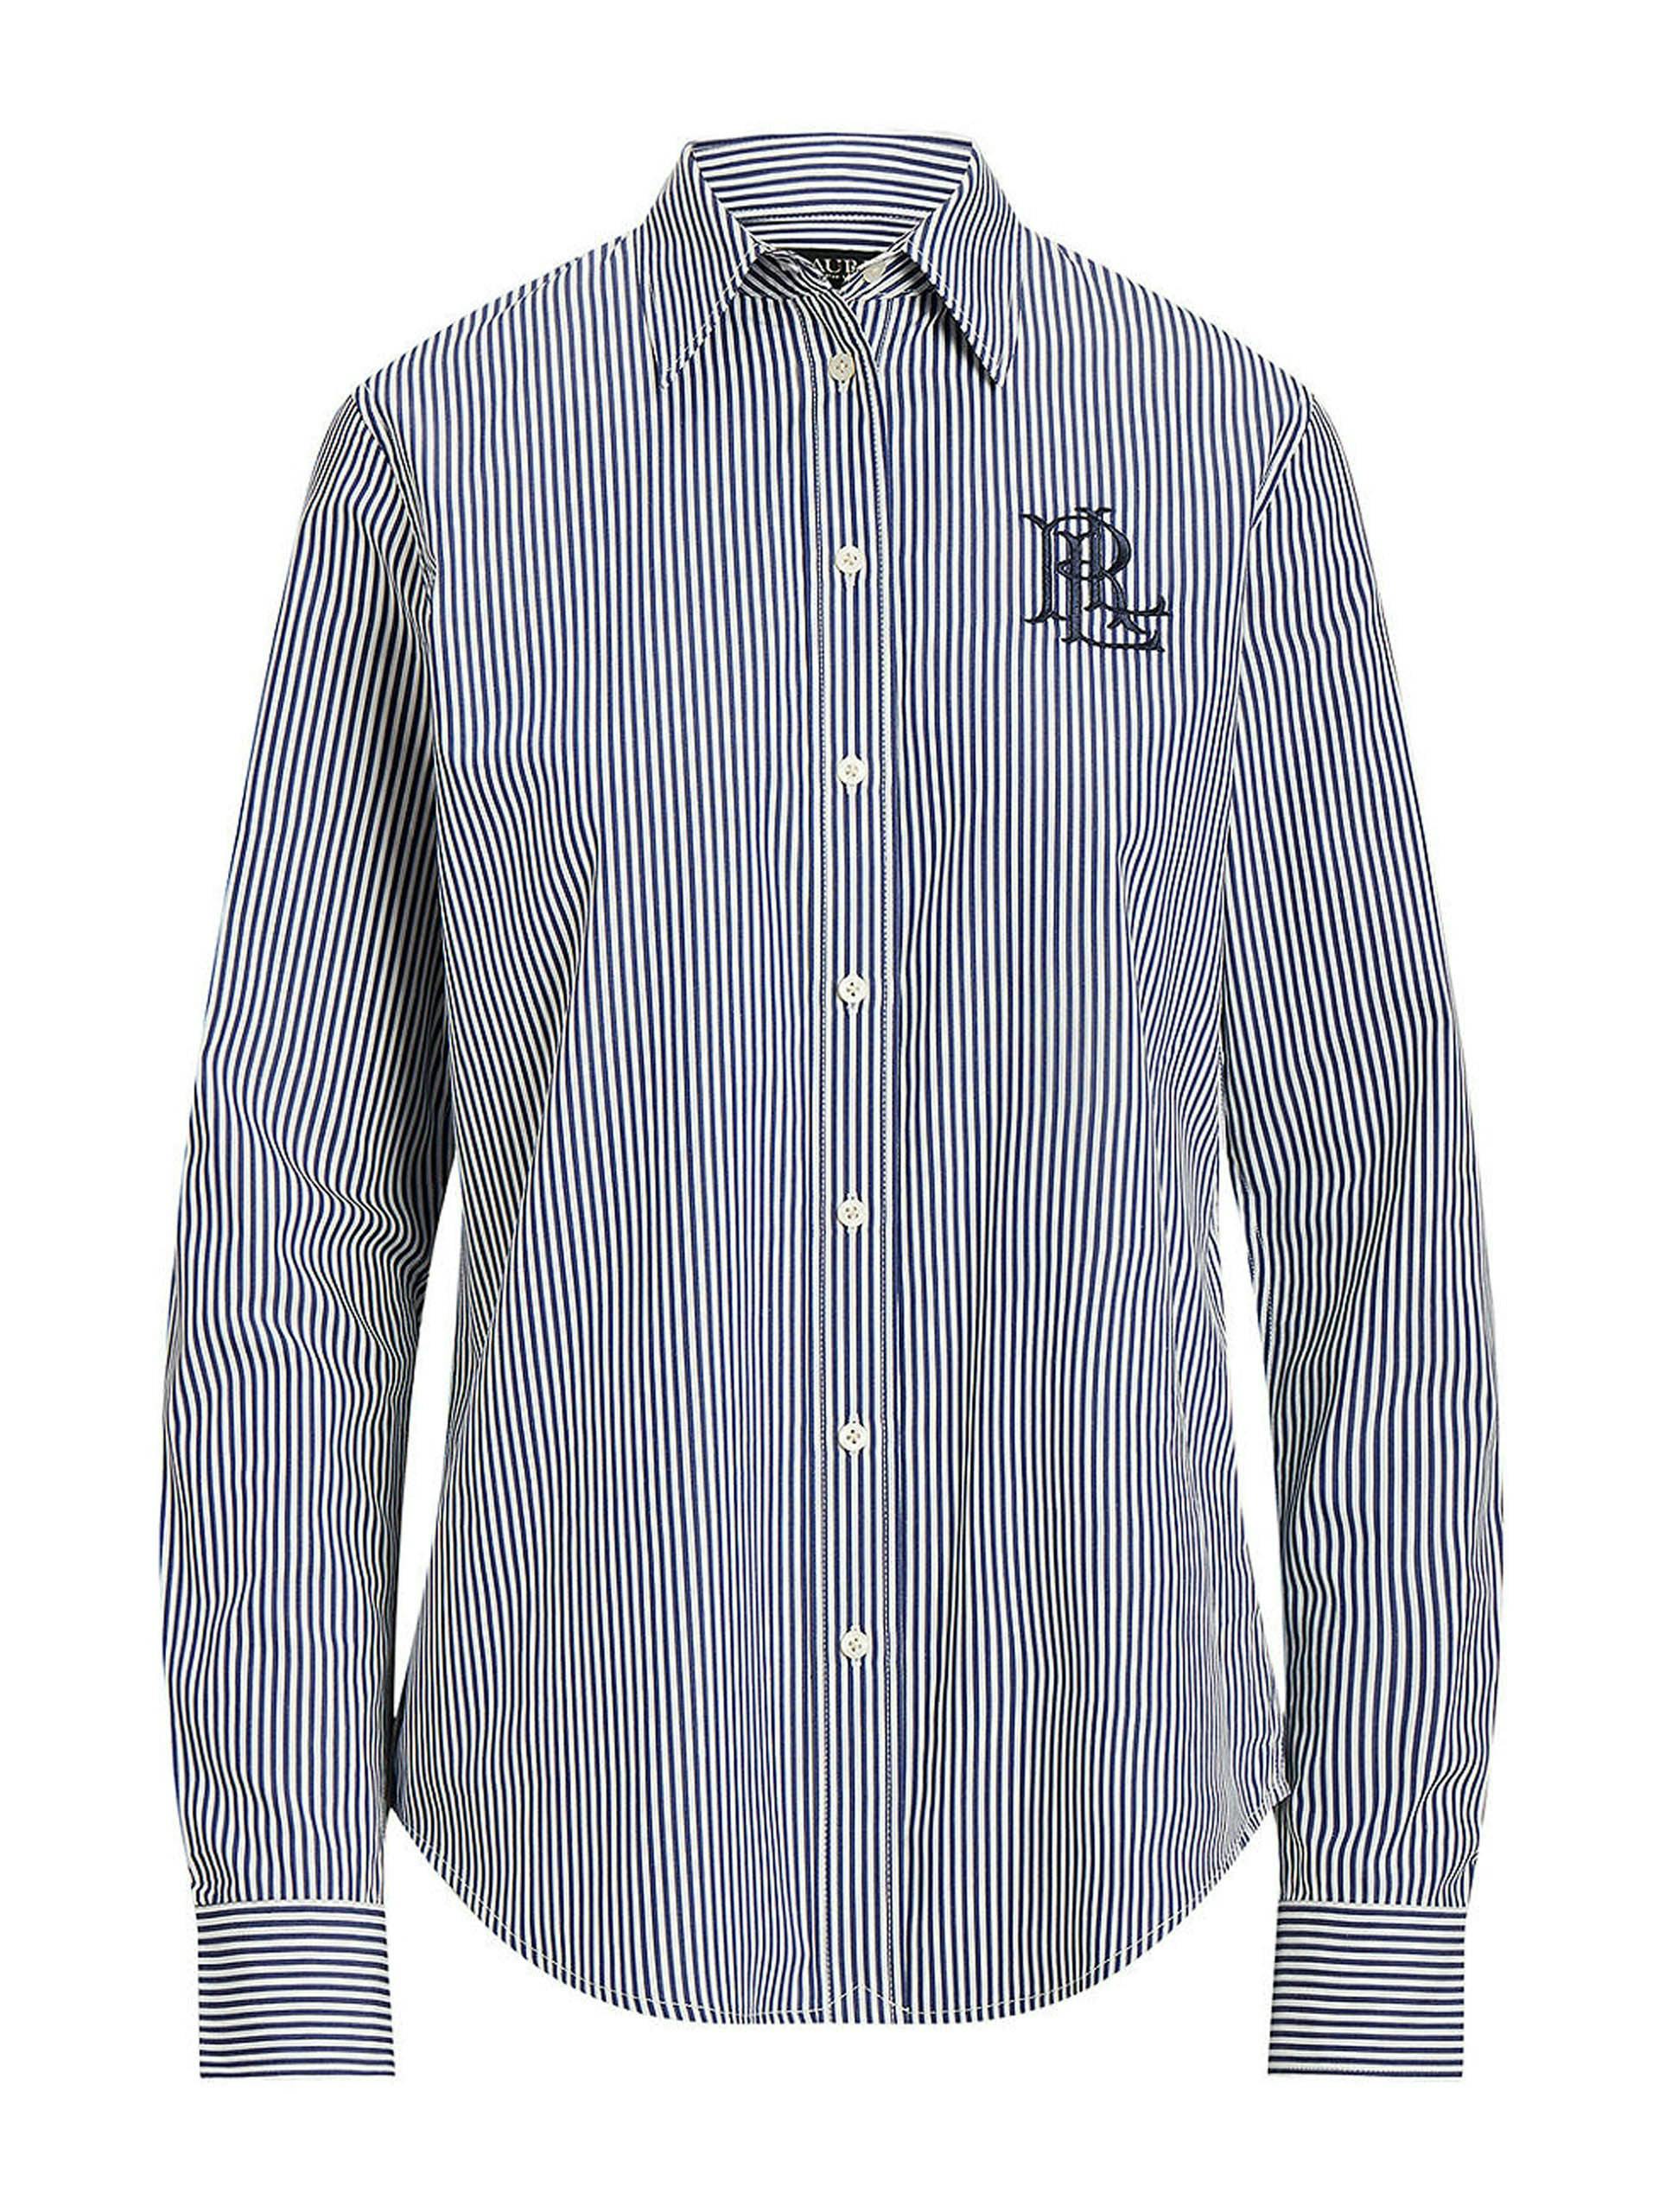 White and navy striped shirt